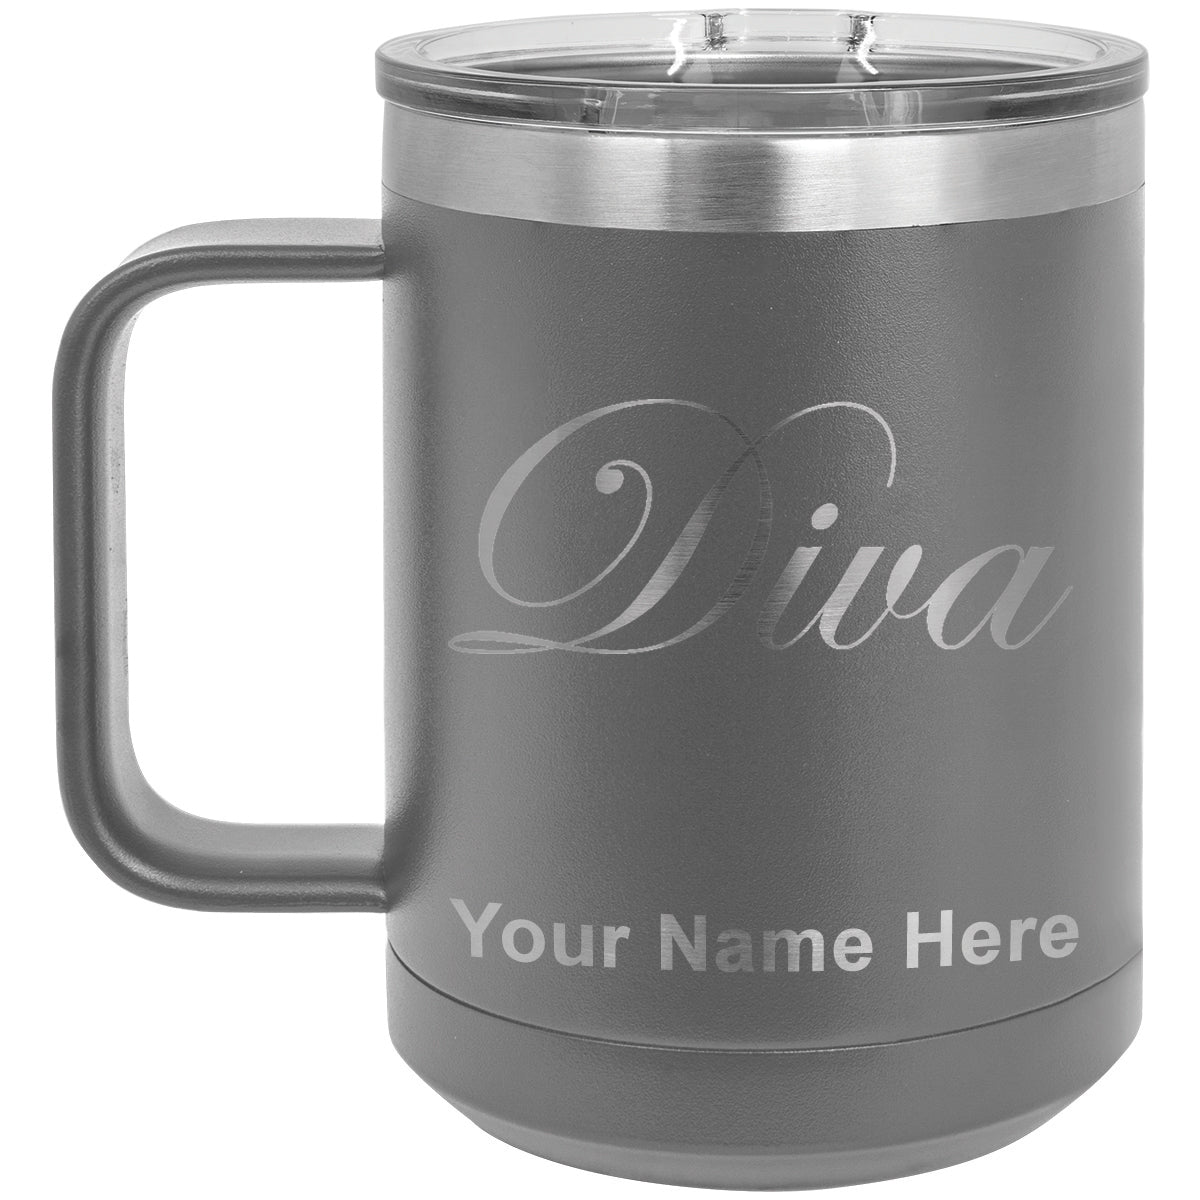 15oz Vacuum Insulated Coffee Mug, Diva, Personalized Engraving Included